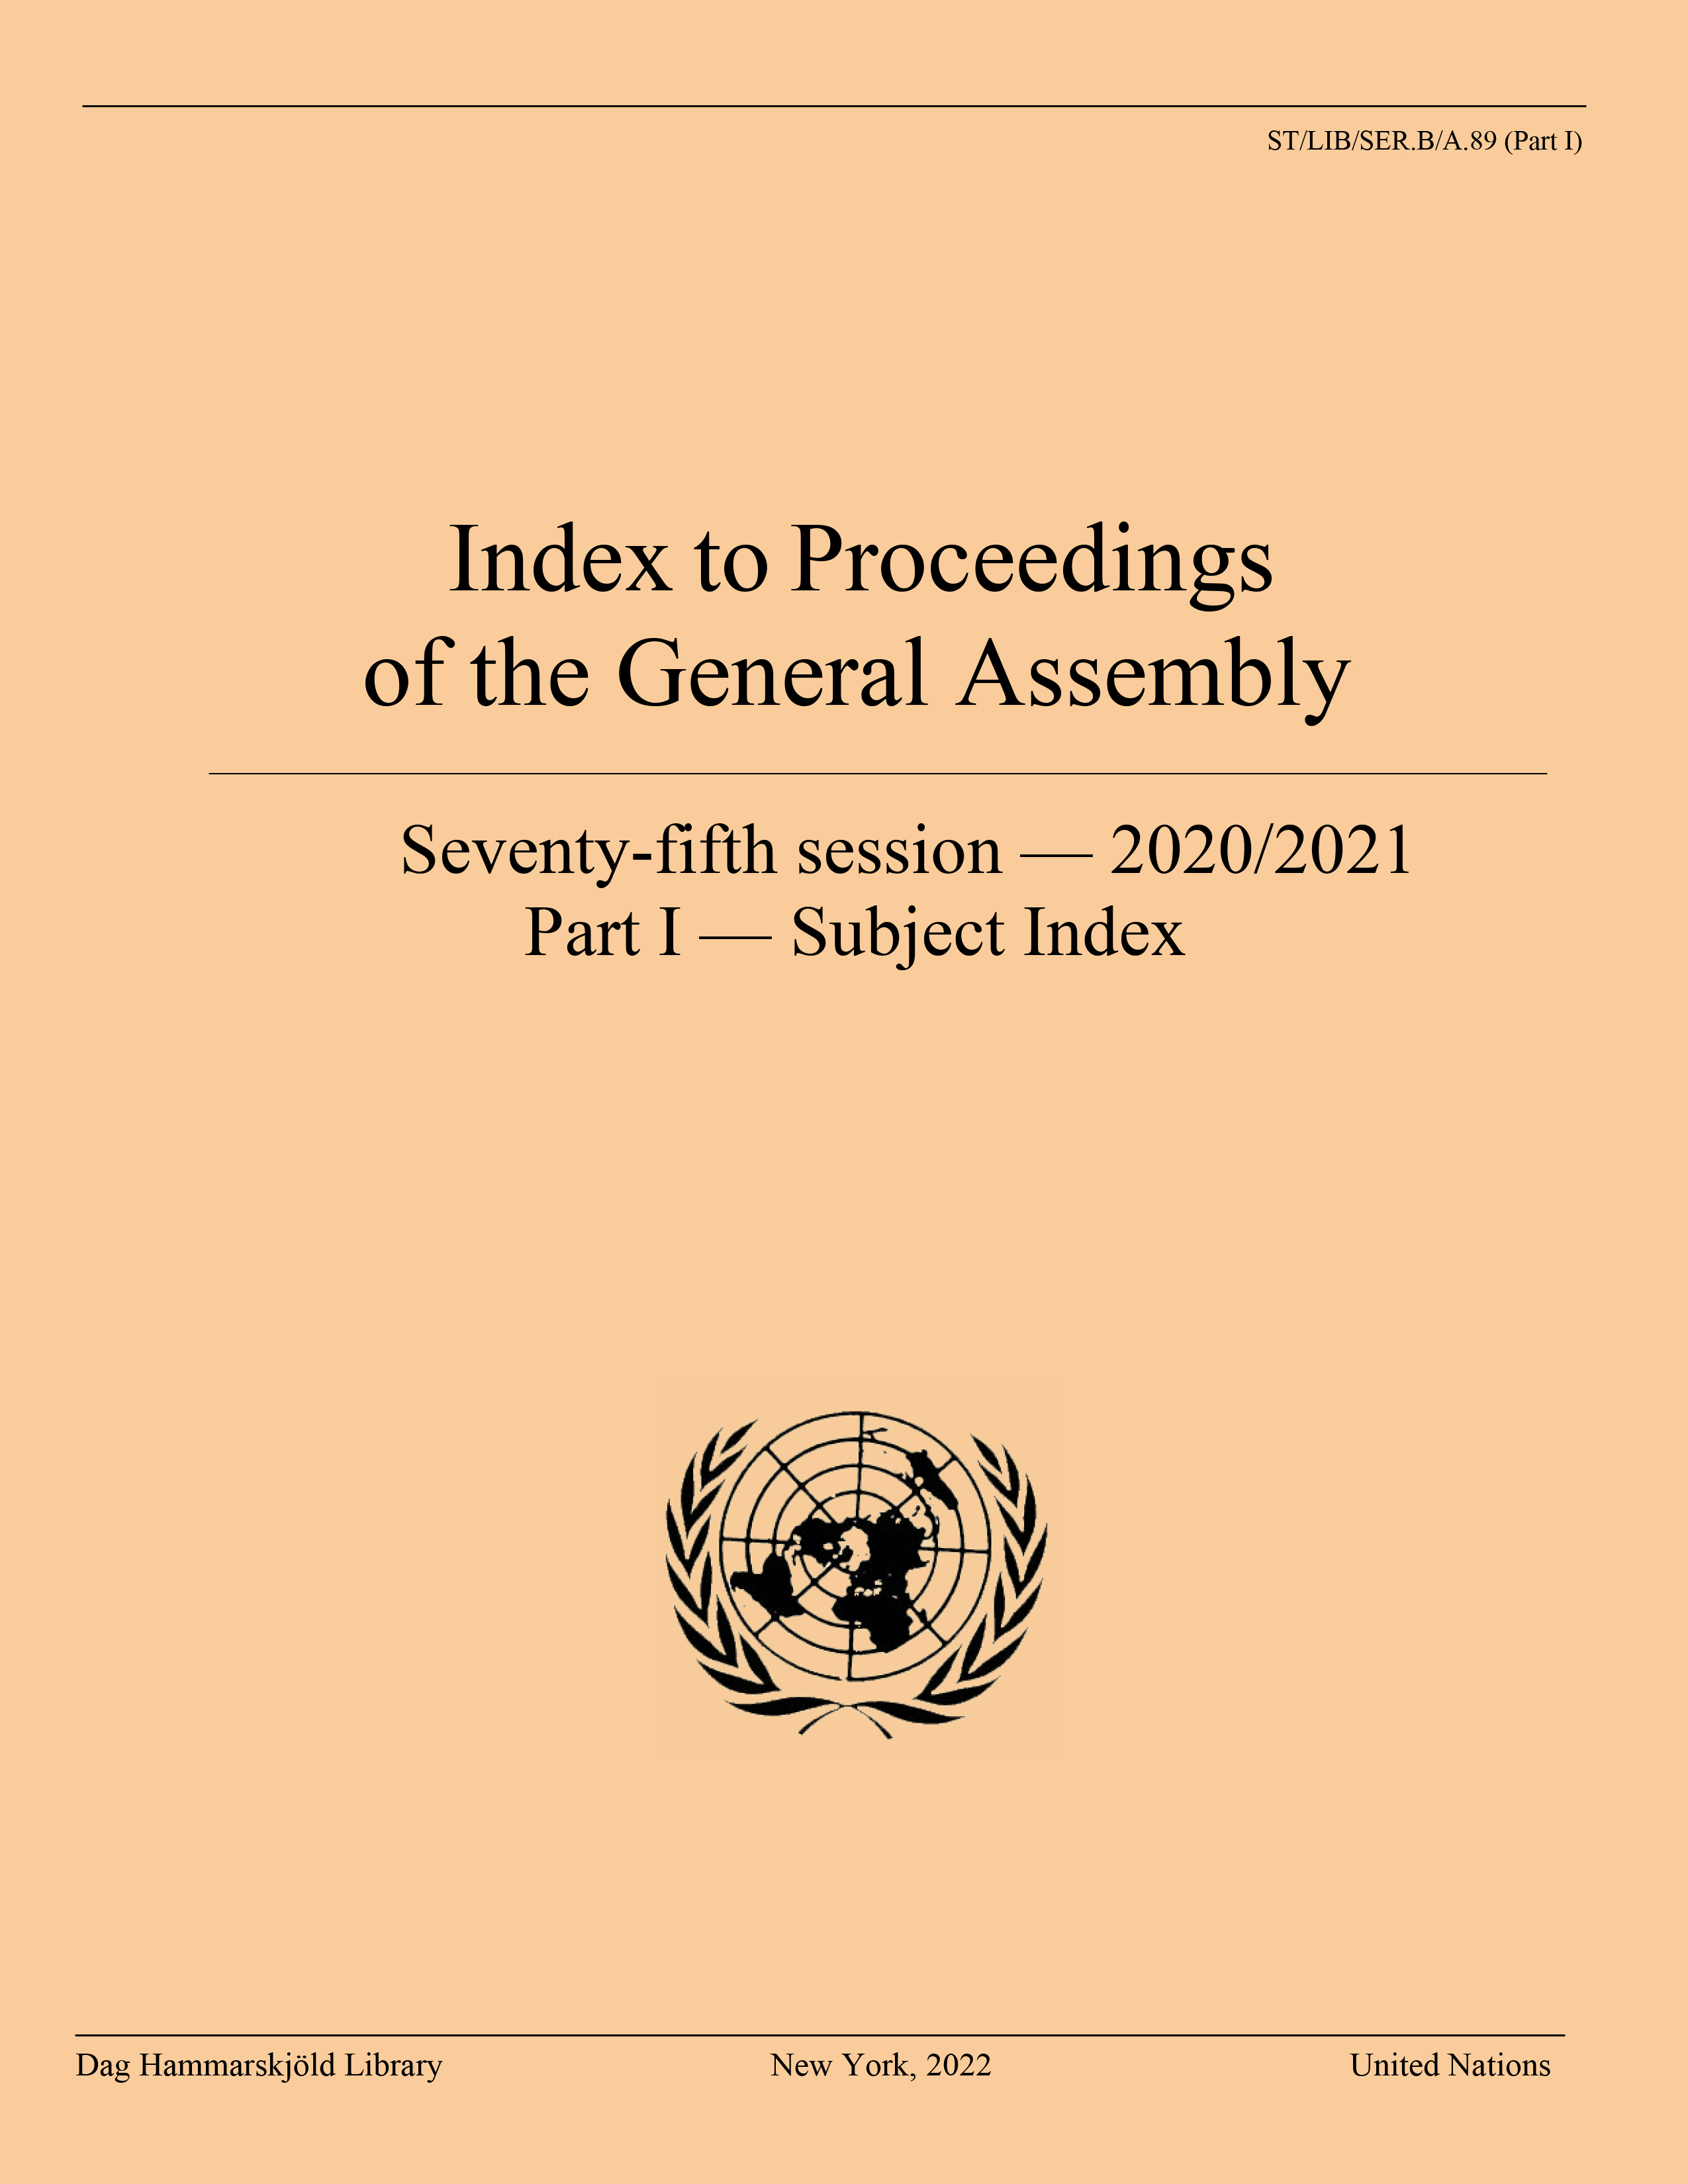 image of Index to Proceedings of the General Assembly 2020/2021